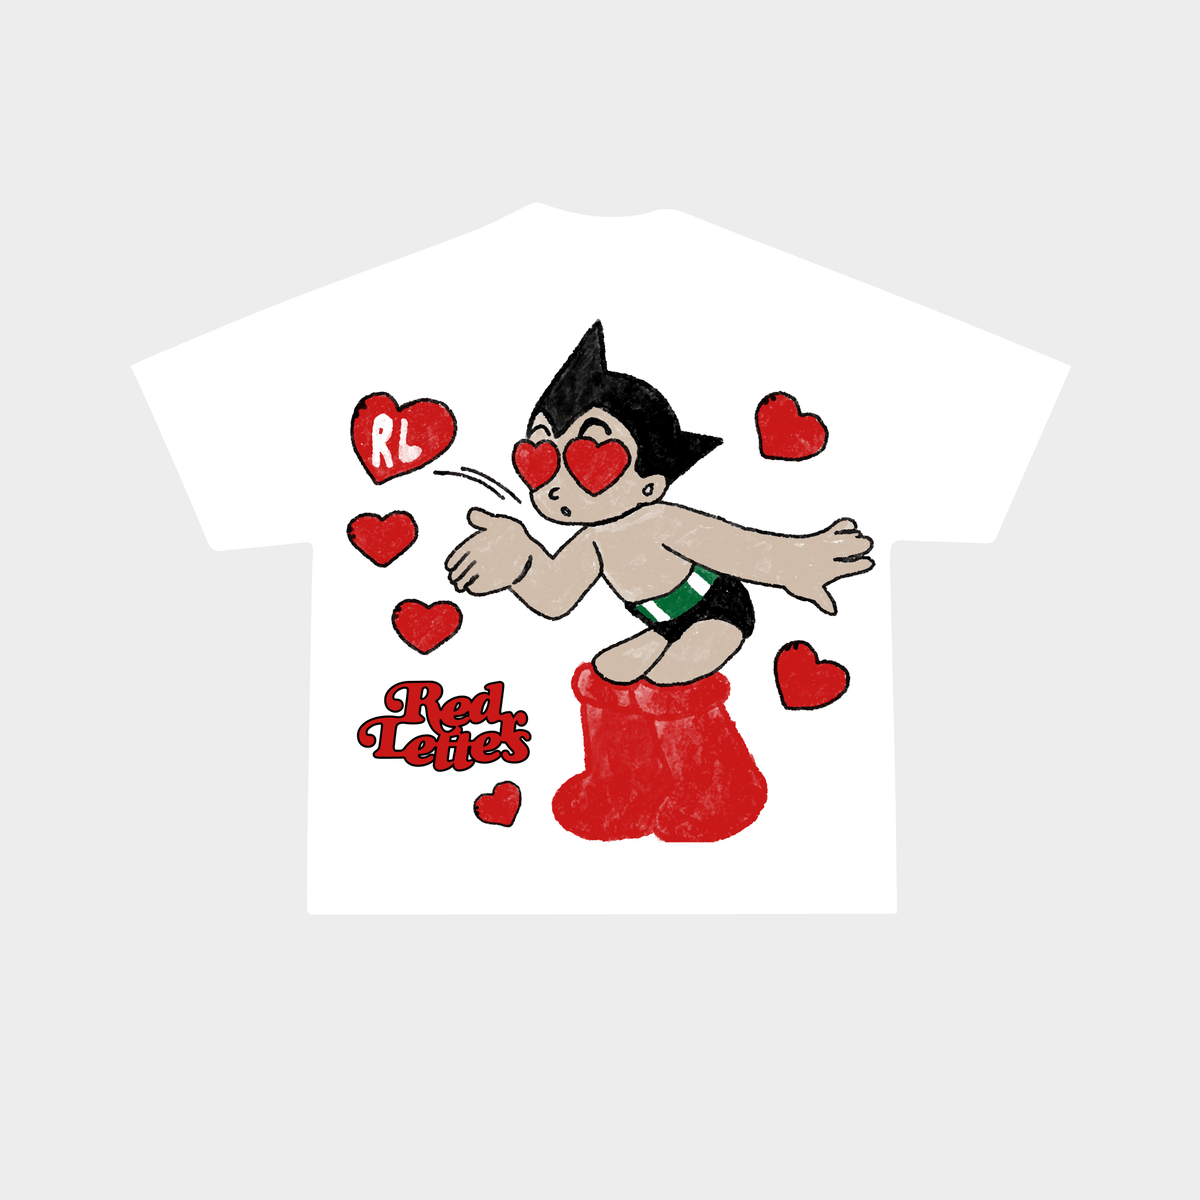 &quot;Astro Kiss&quot; Tee - RED LETTERS